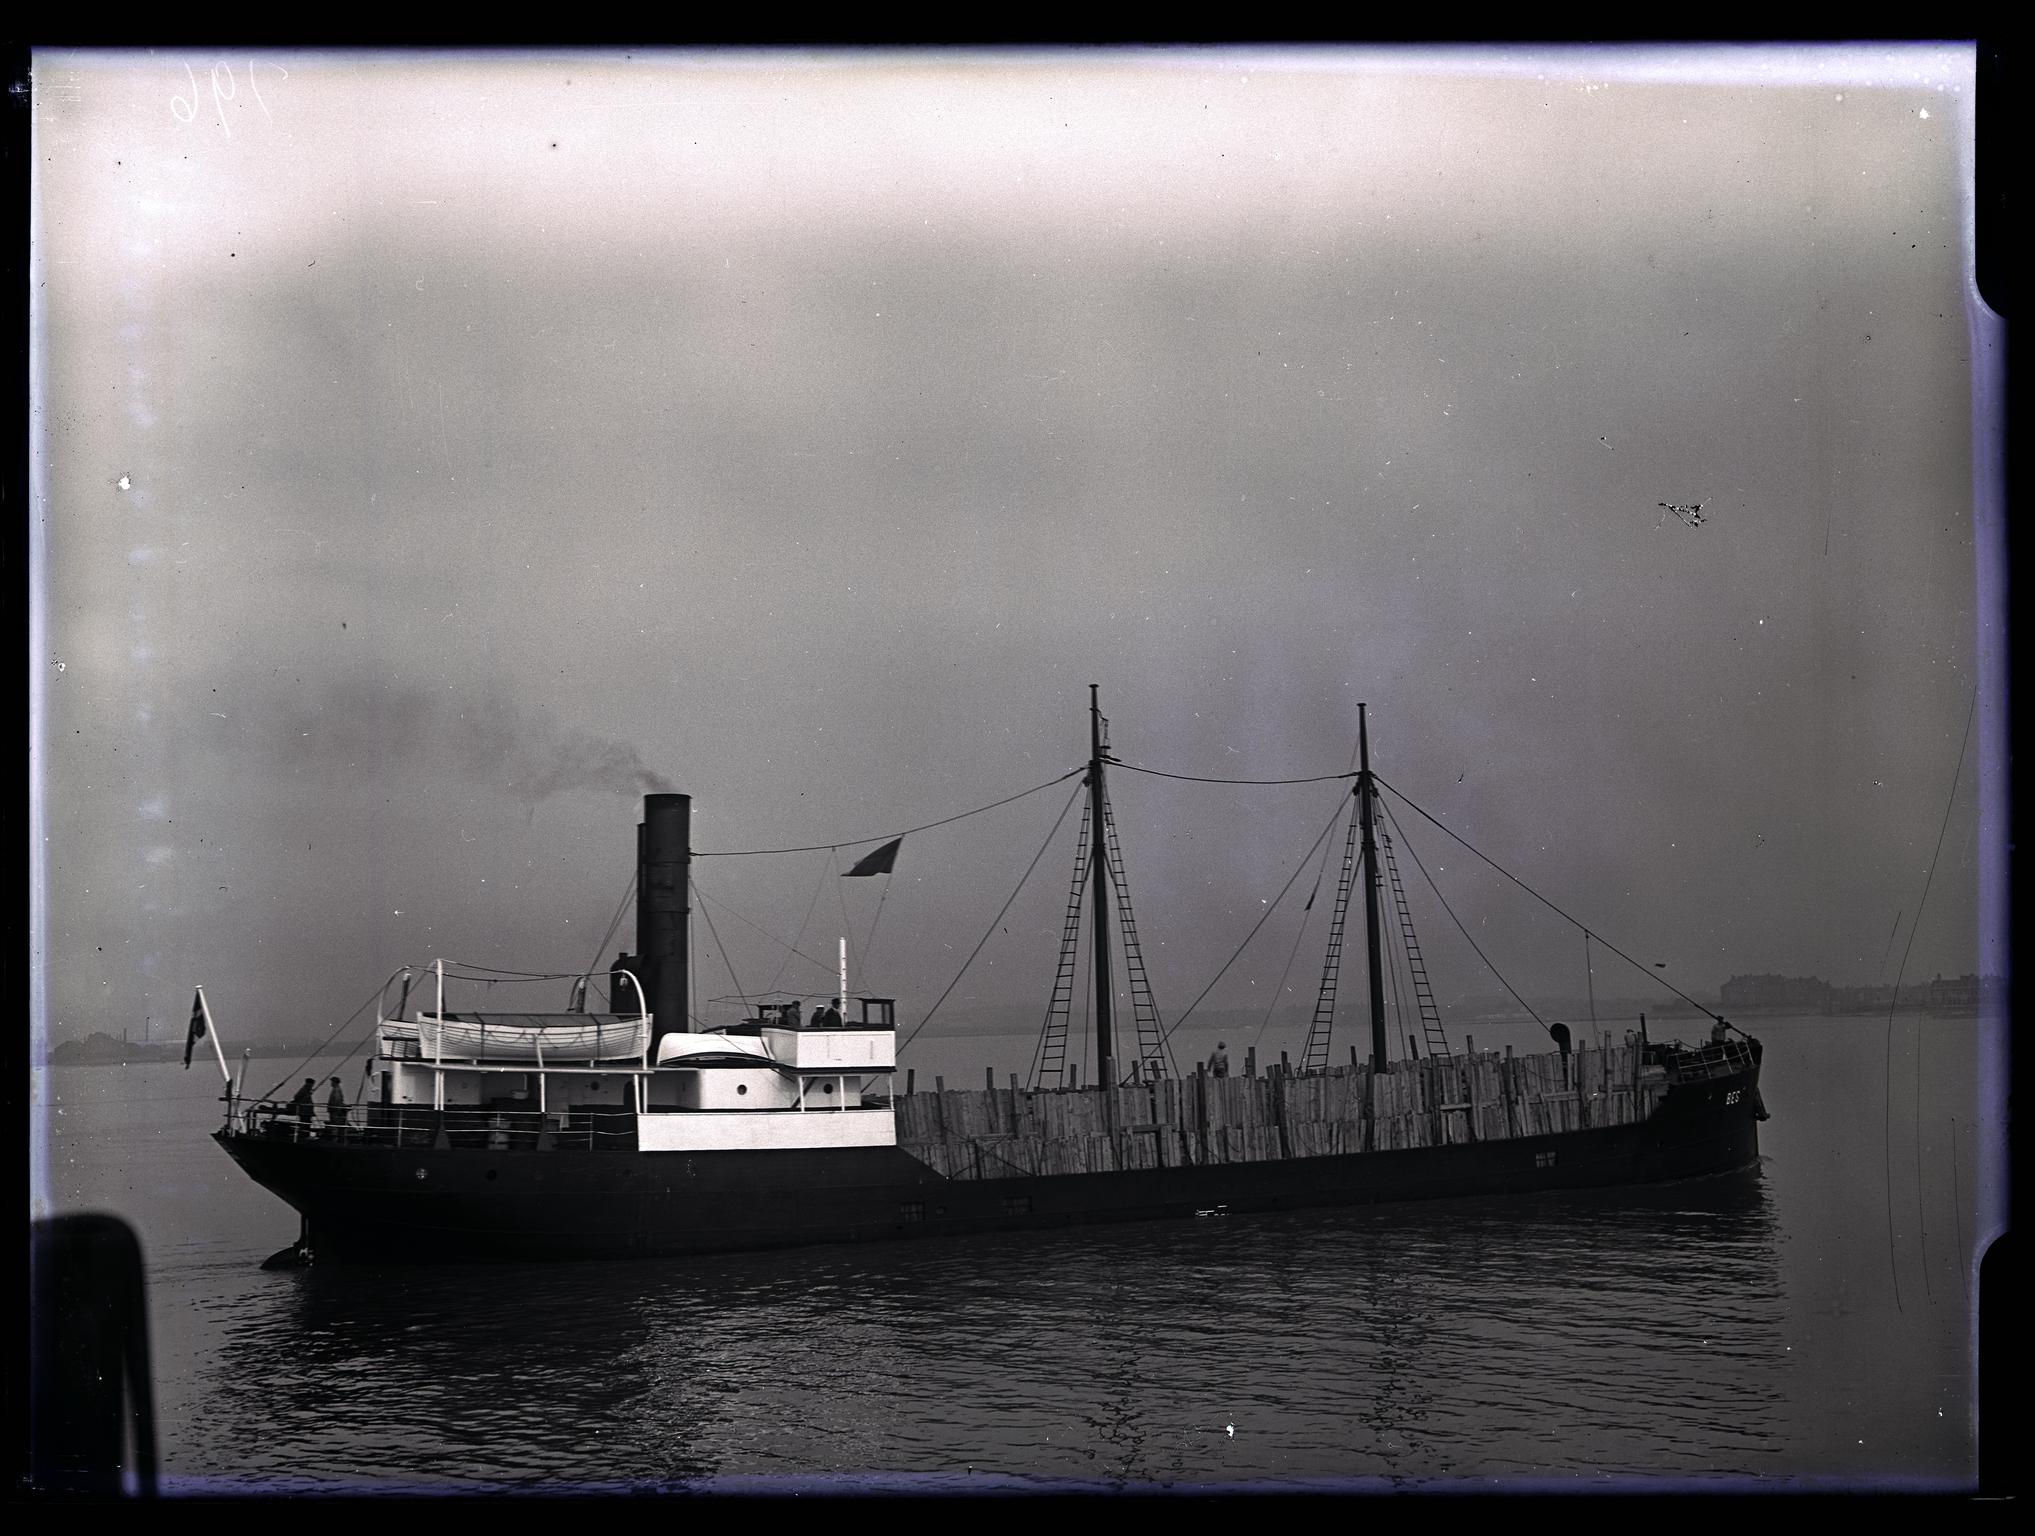 S.S. BES, glass negative